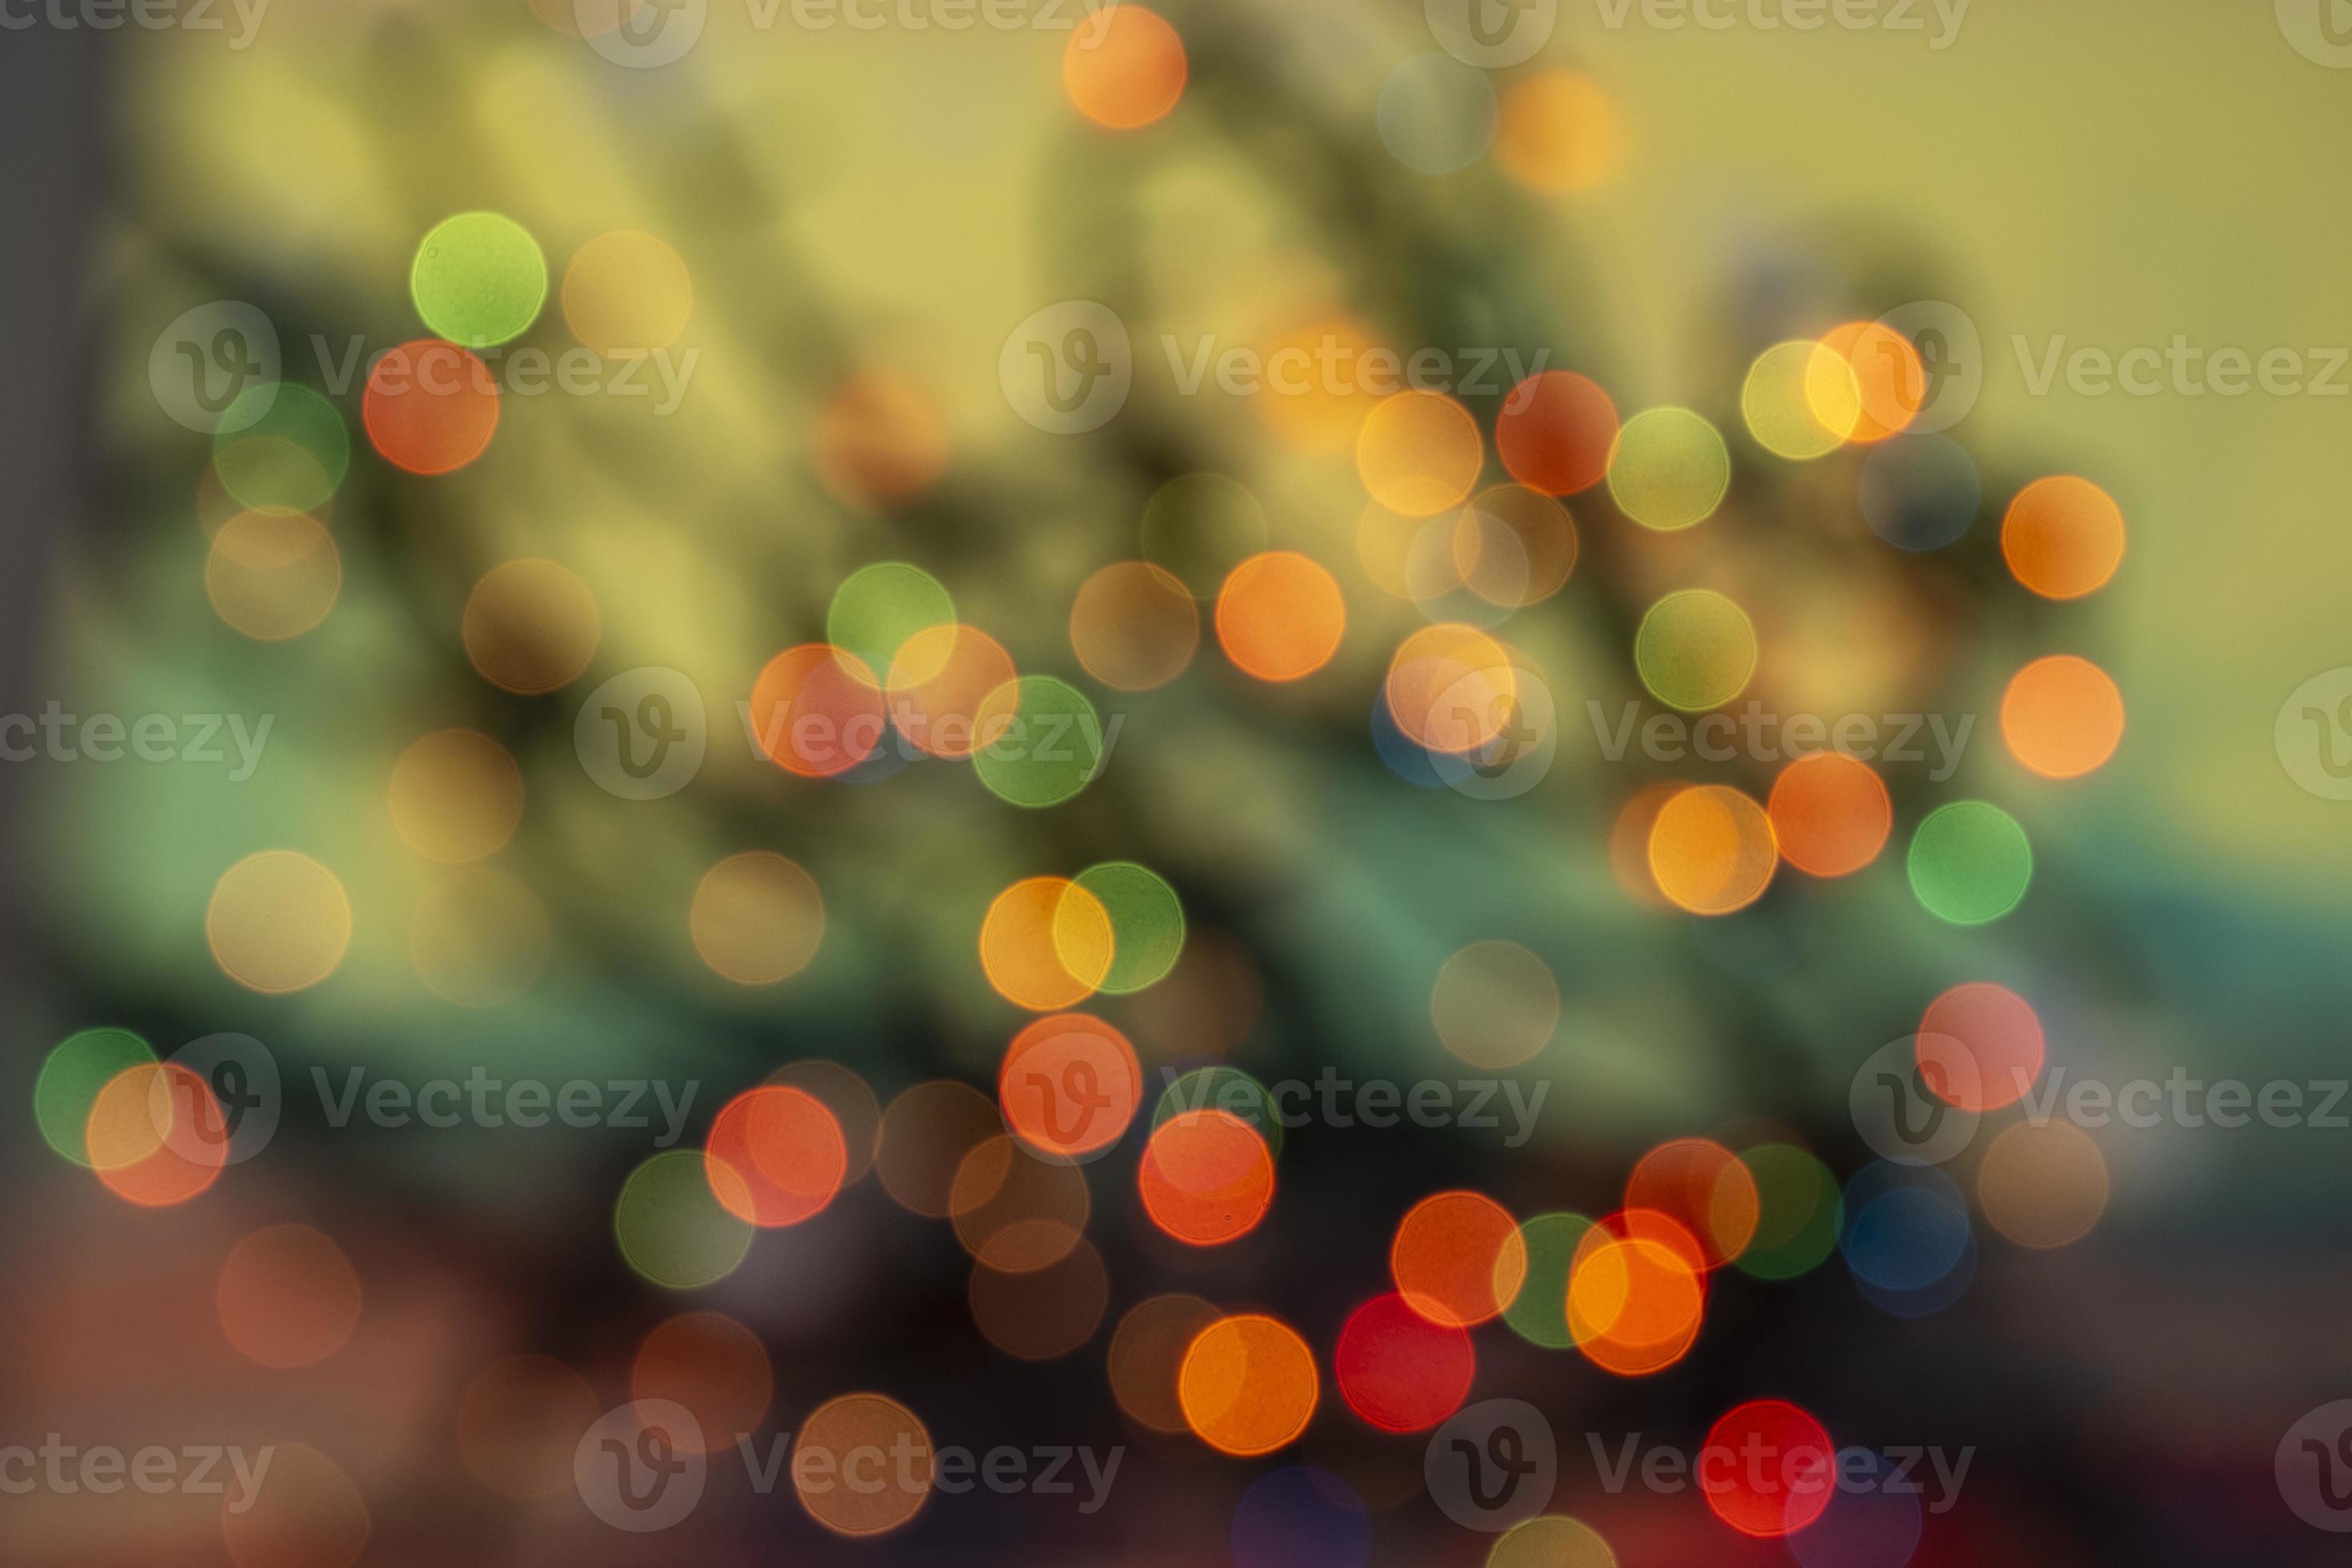 Abstract Blurred Of Blue Lights Background Or Blur Light Of Christmas  Decorations Concept Stock Photo, Picture and Royalty Free Image. Image  70698539.